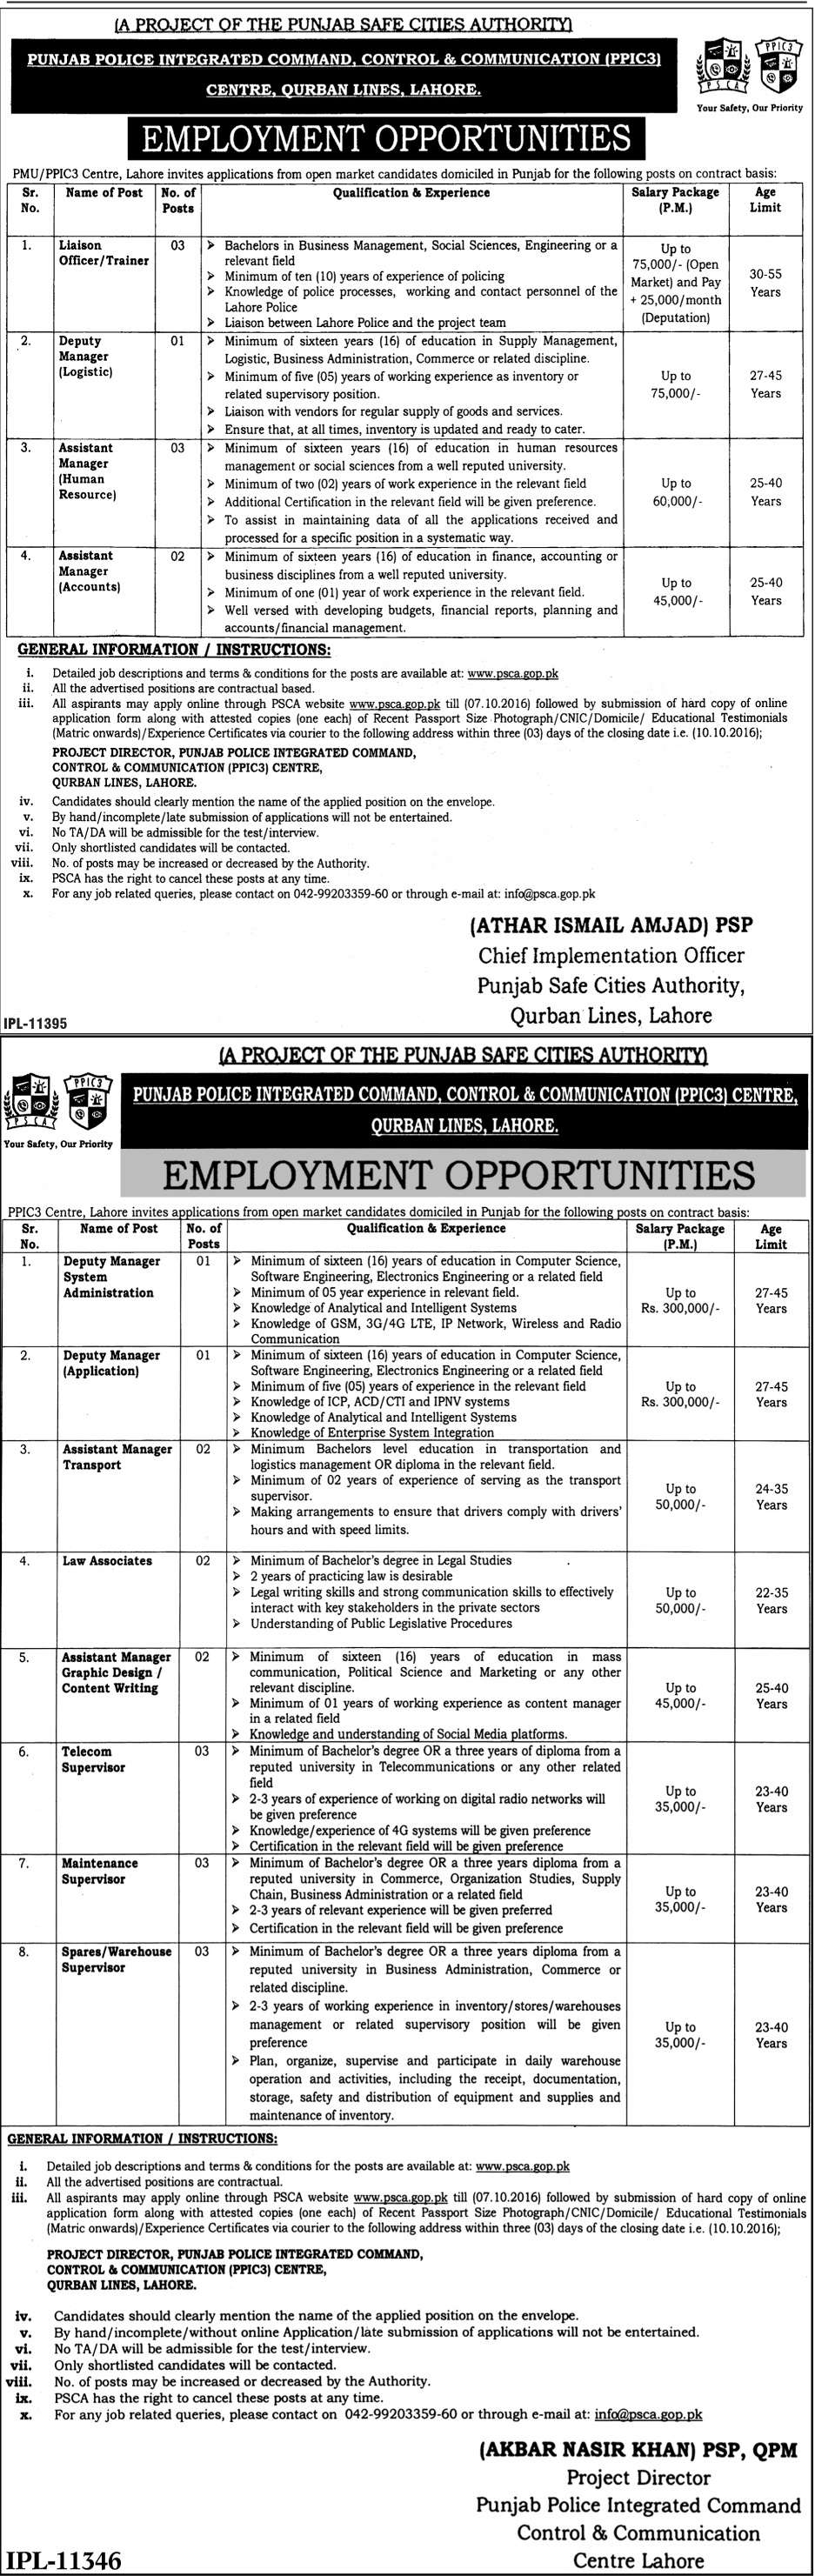 punjab-police-ppic3-jobs-septoct-2016-by-psca